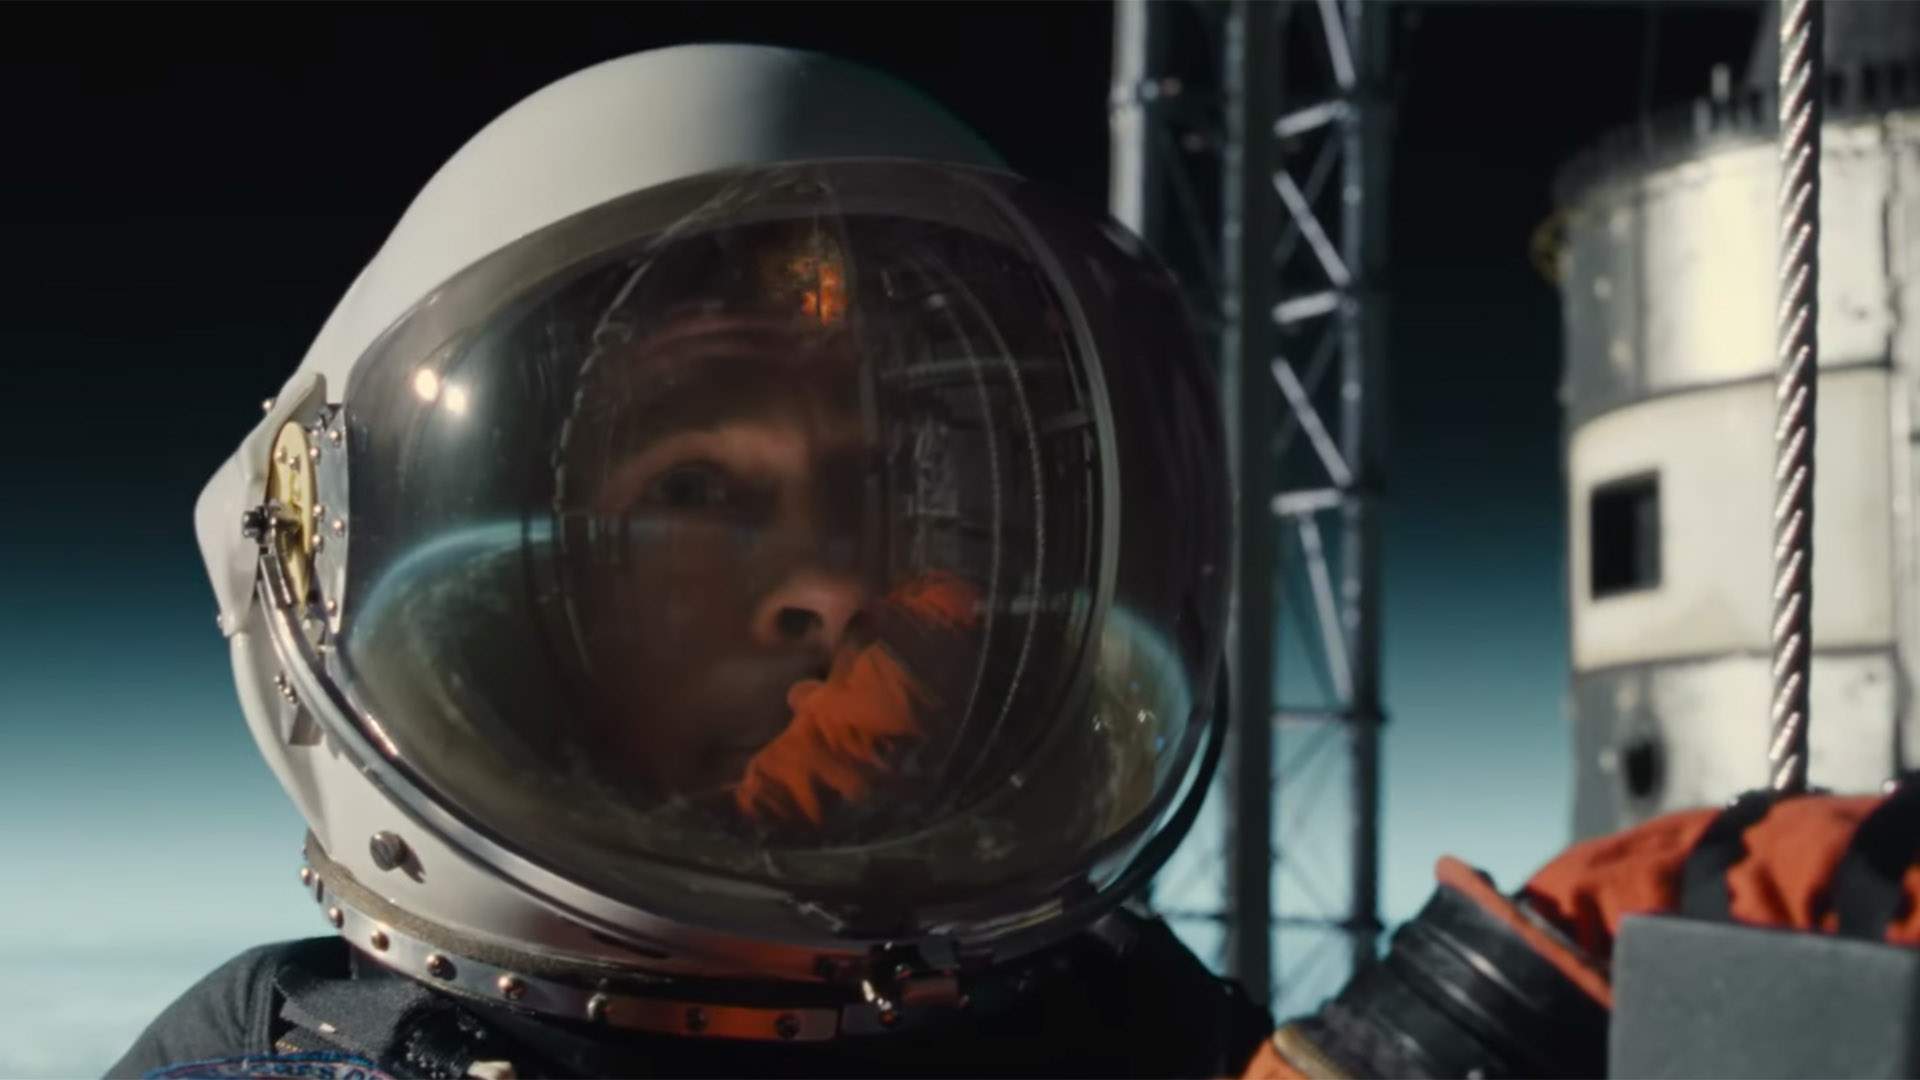 Brad Pitt Blasts Into Space in the First Trailer for the New Interplanetary Thriller 'Ad Astra'